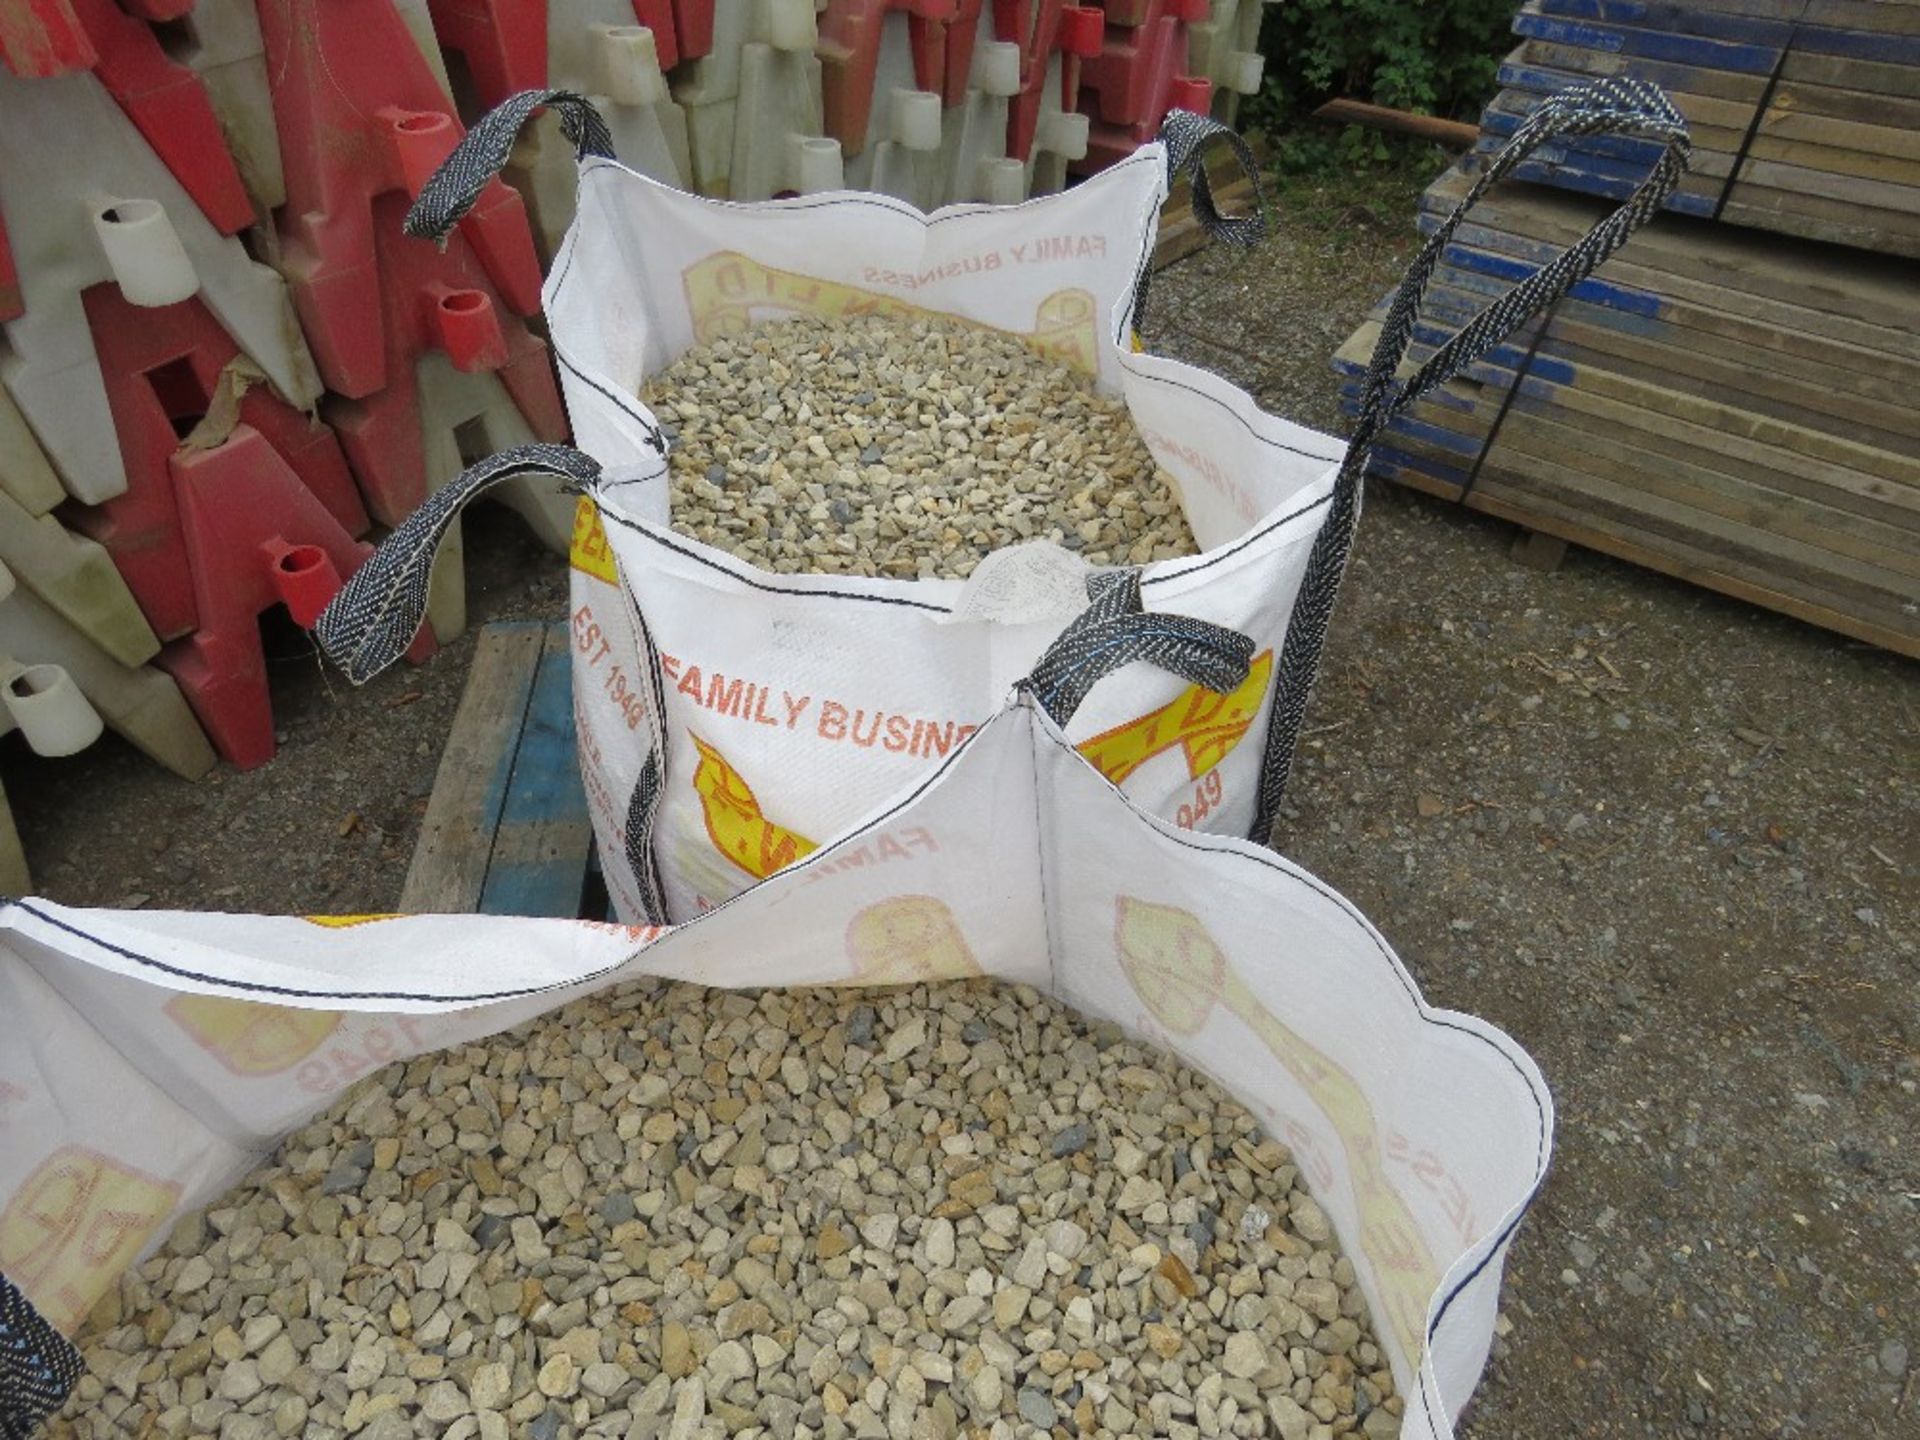 2 X BULK BAGS CONTAINING COTSWOLD GOLD STONE CHIPPINGS WITH BLACK ICE CHIPPINGS ADDED, 20-10MM SPECI